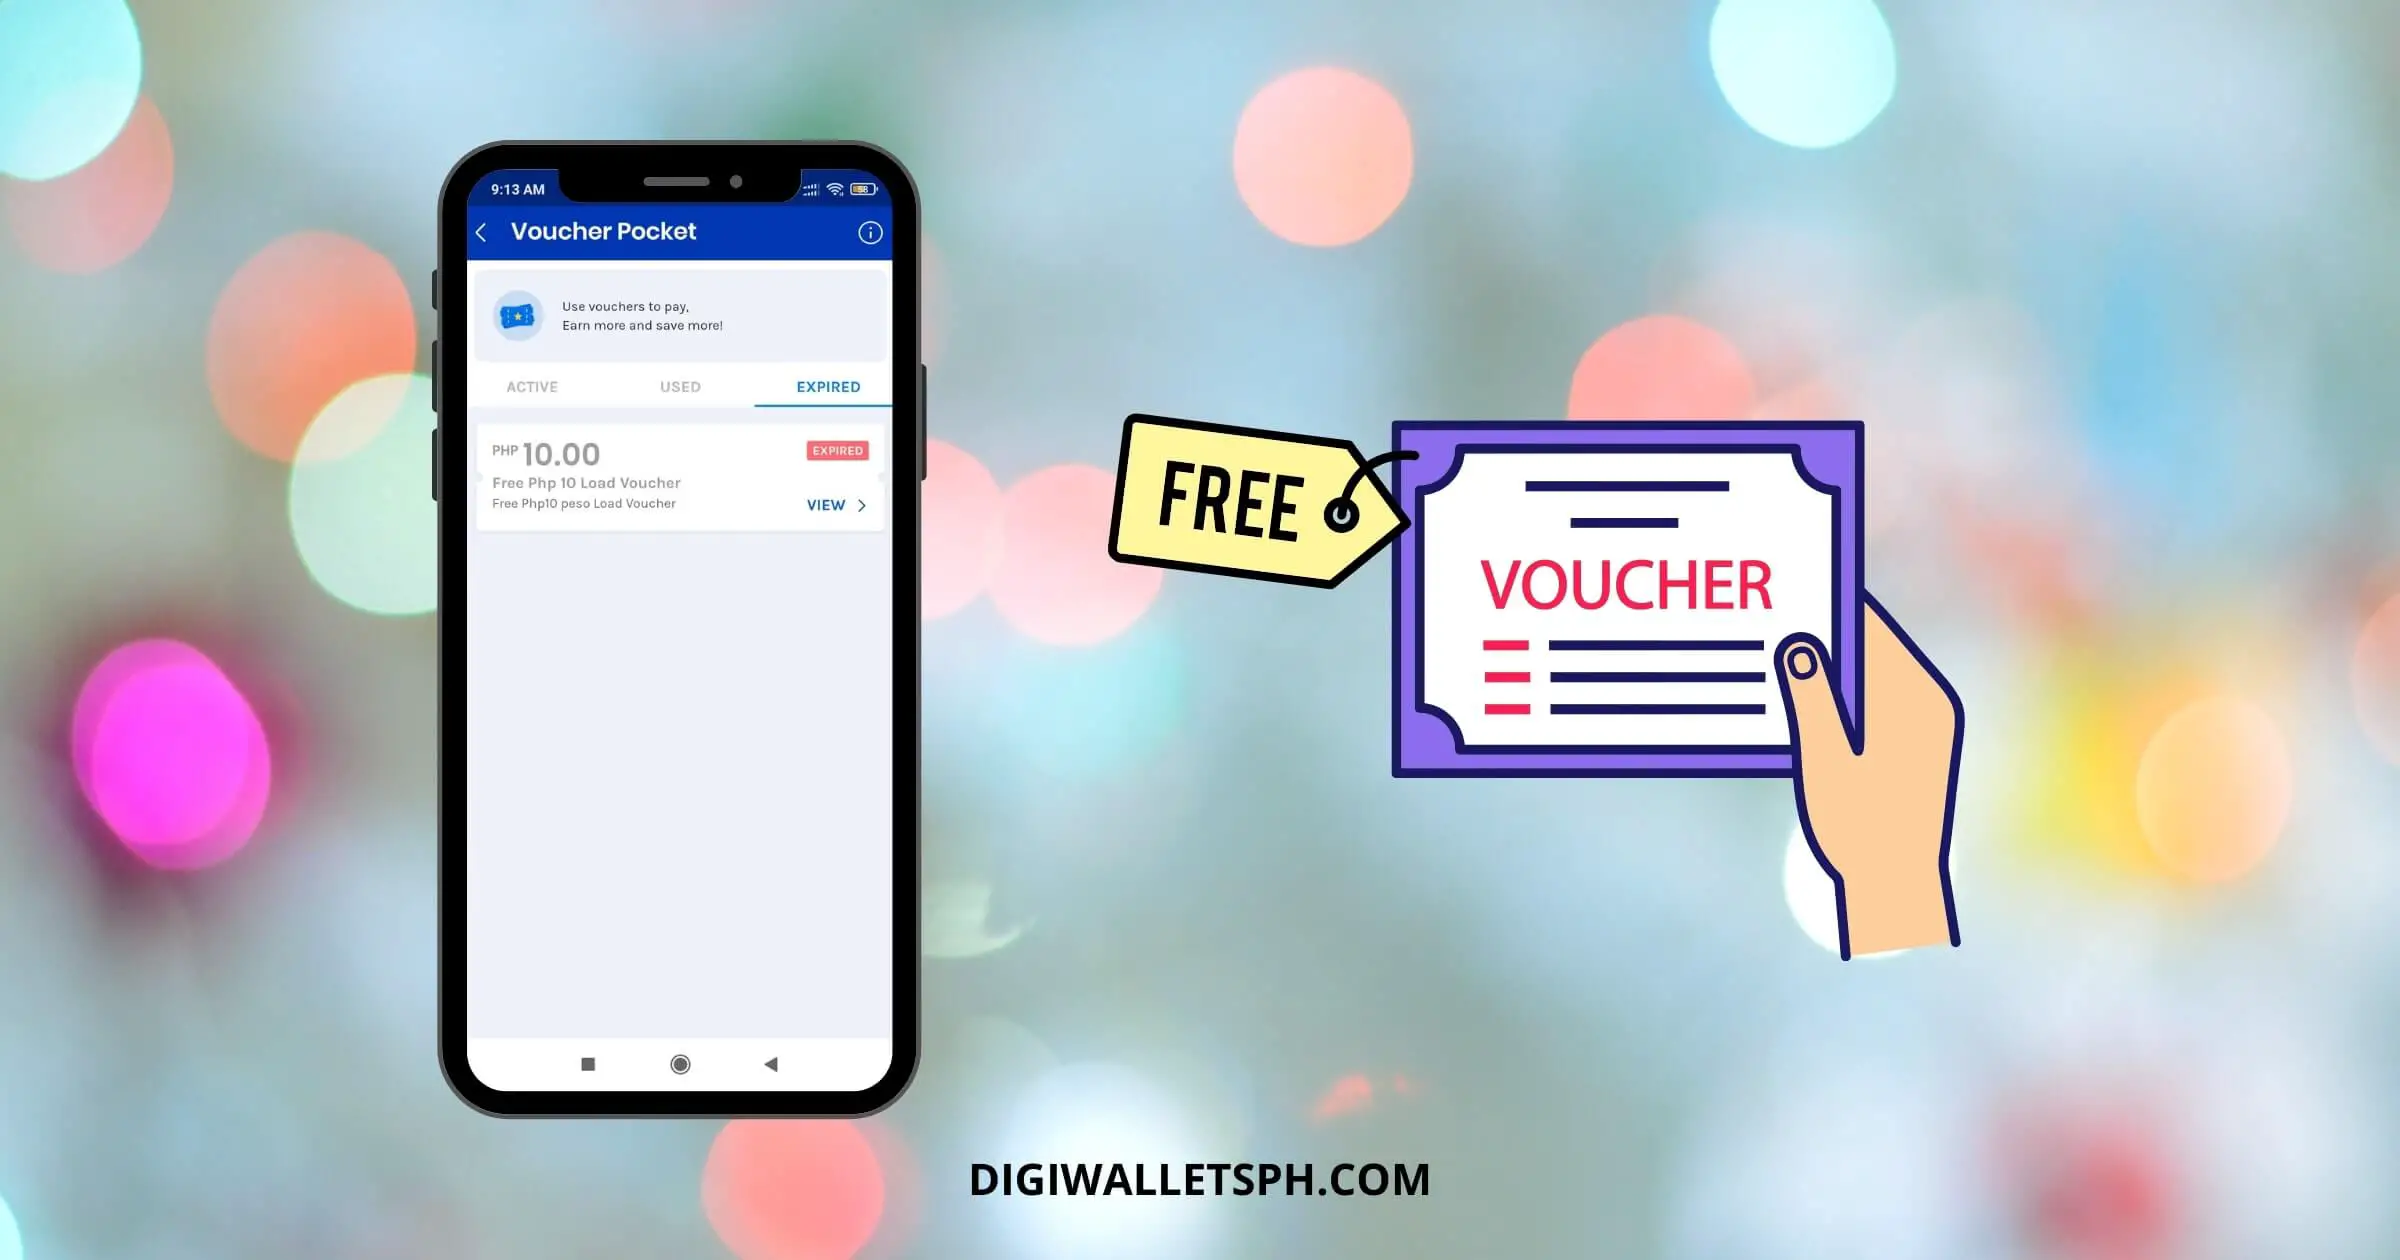 How to use load voucher in GCash